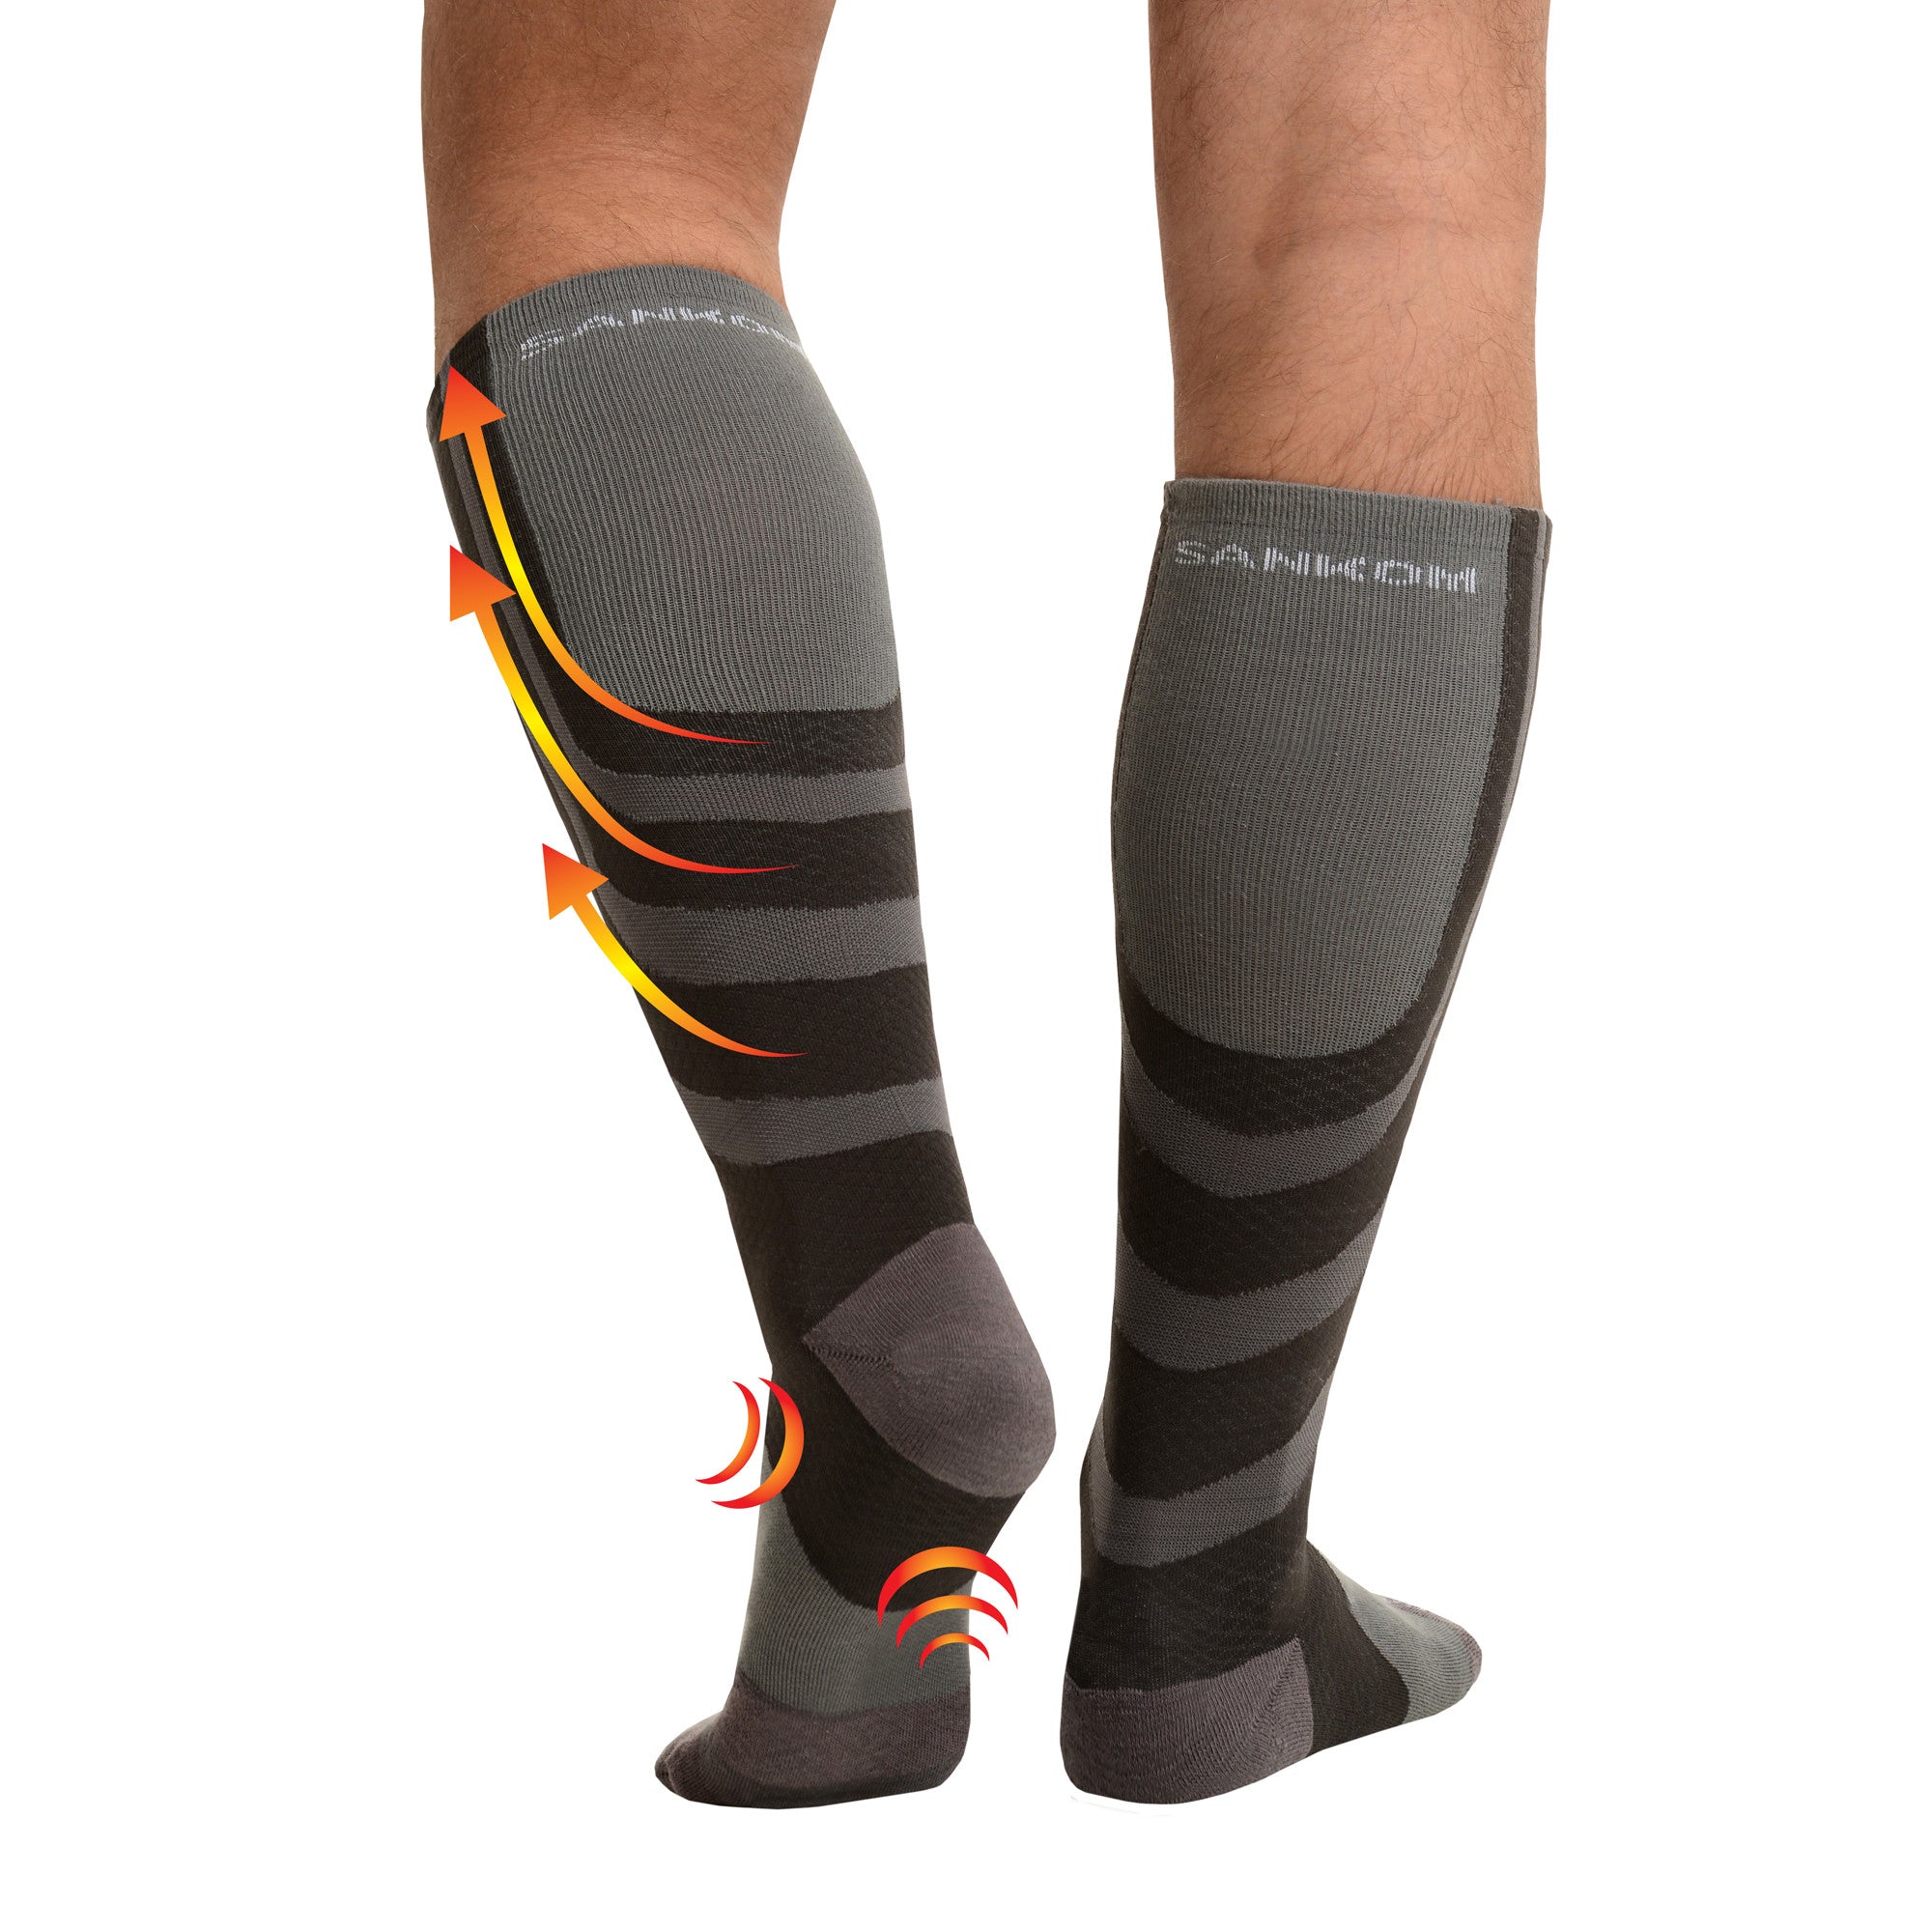 Sankom Bangladesh - SANKOM PATENT HYPOALLERGENIC COMPRESSION SOCKS  Immediate relief! Unique patented active graduated compression technology.  CLINICALLY PROVEN TO: ✓ IMPROVES BLOOD CIRCULATION ✓ REDUCE SWELLING AND  HEAVINESS ✓ HELP PREVENT VARICOSE